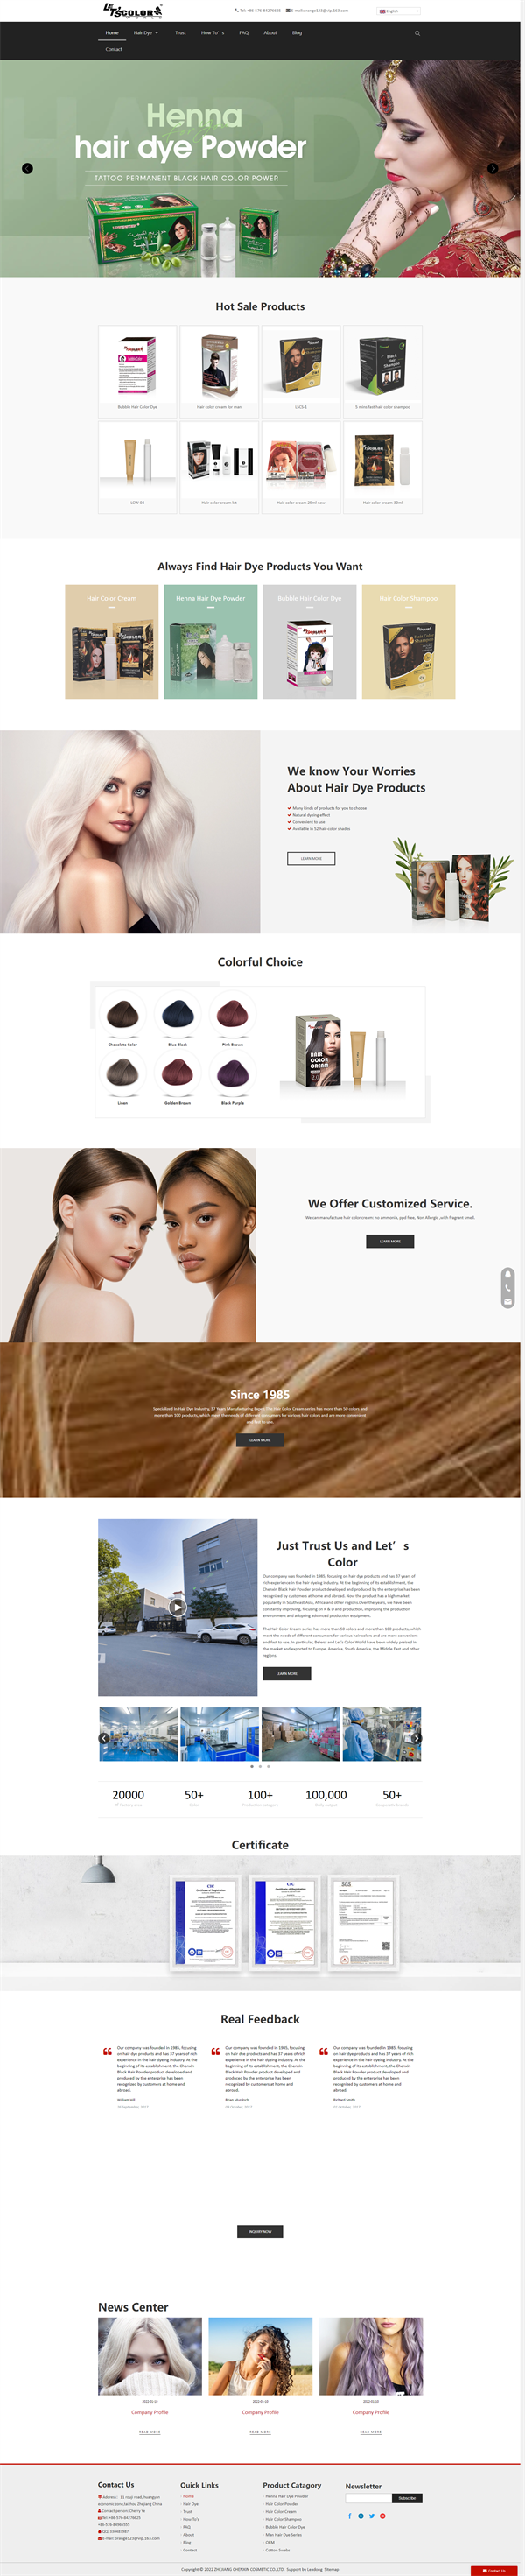 letscolorhairdye.com1.png